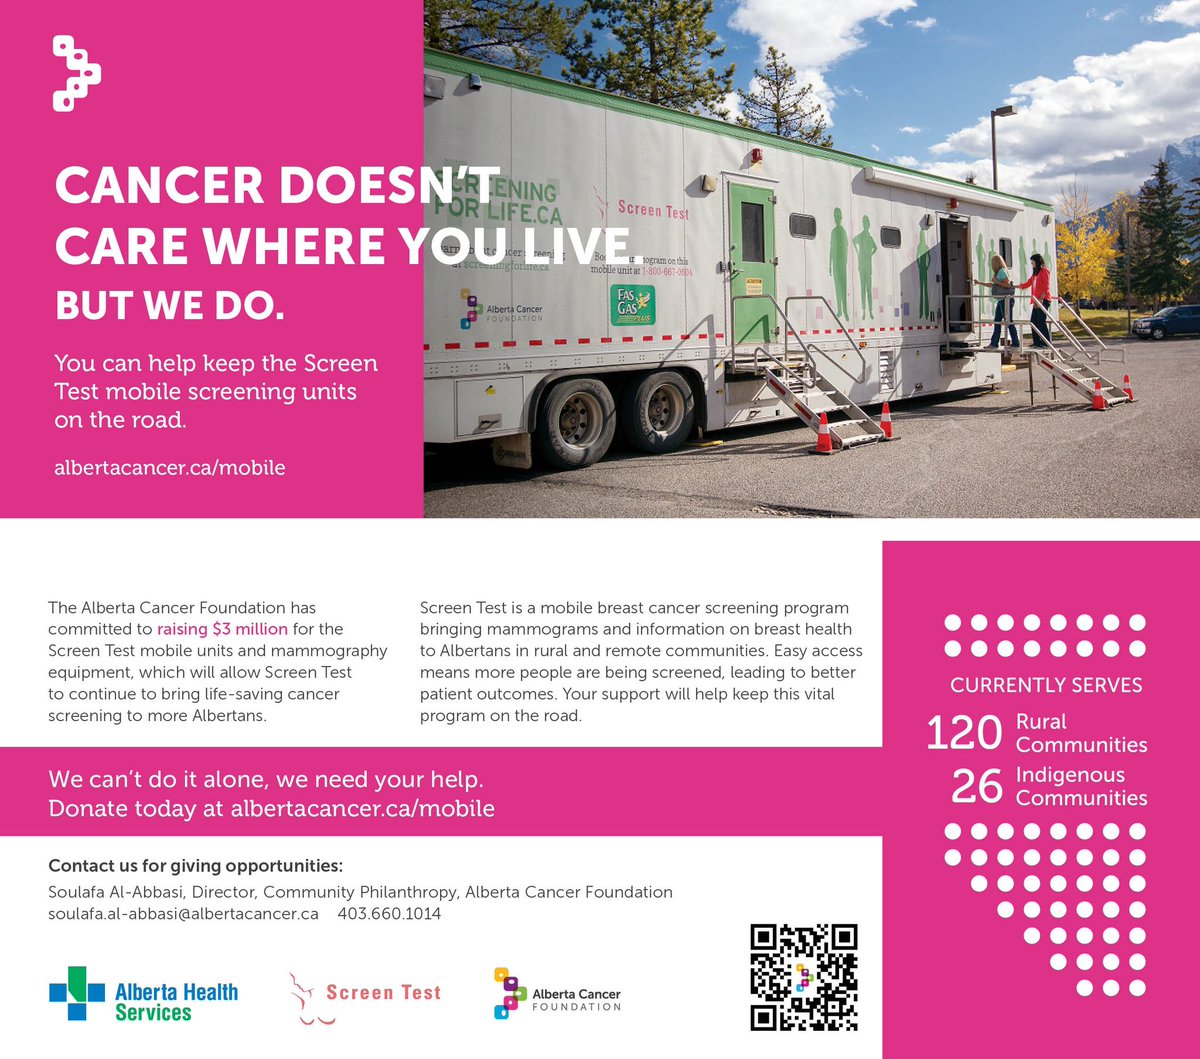 “No matter where you live in the province, you have the same access to screening services with Screen Test,” says Joan Hauber, manager of the Screen Test program.

#careforall #inclusivecare #ruralcancercare #breastcancerscreening #preventioncansavelives